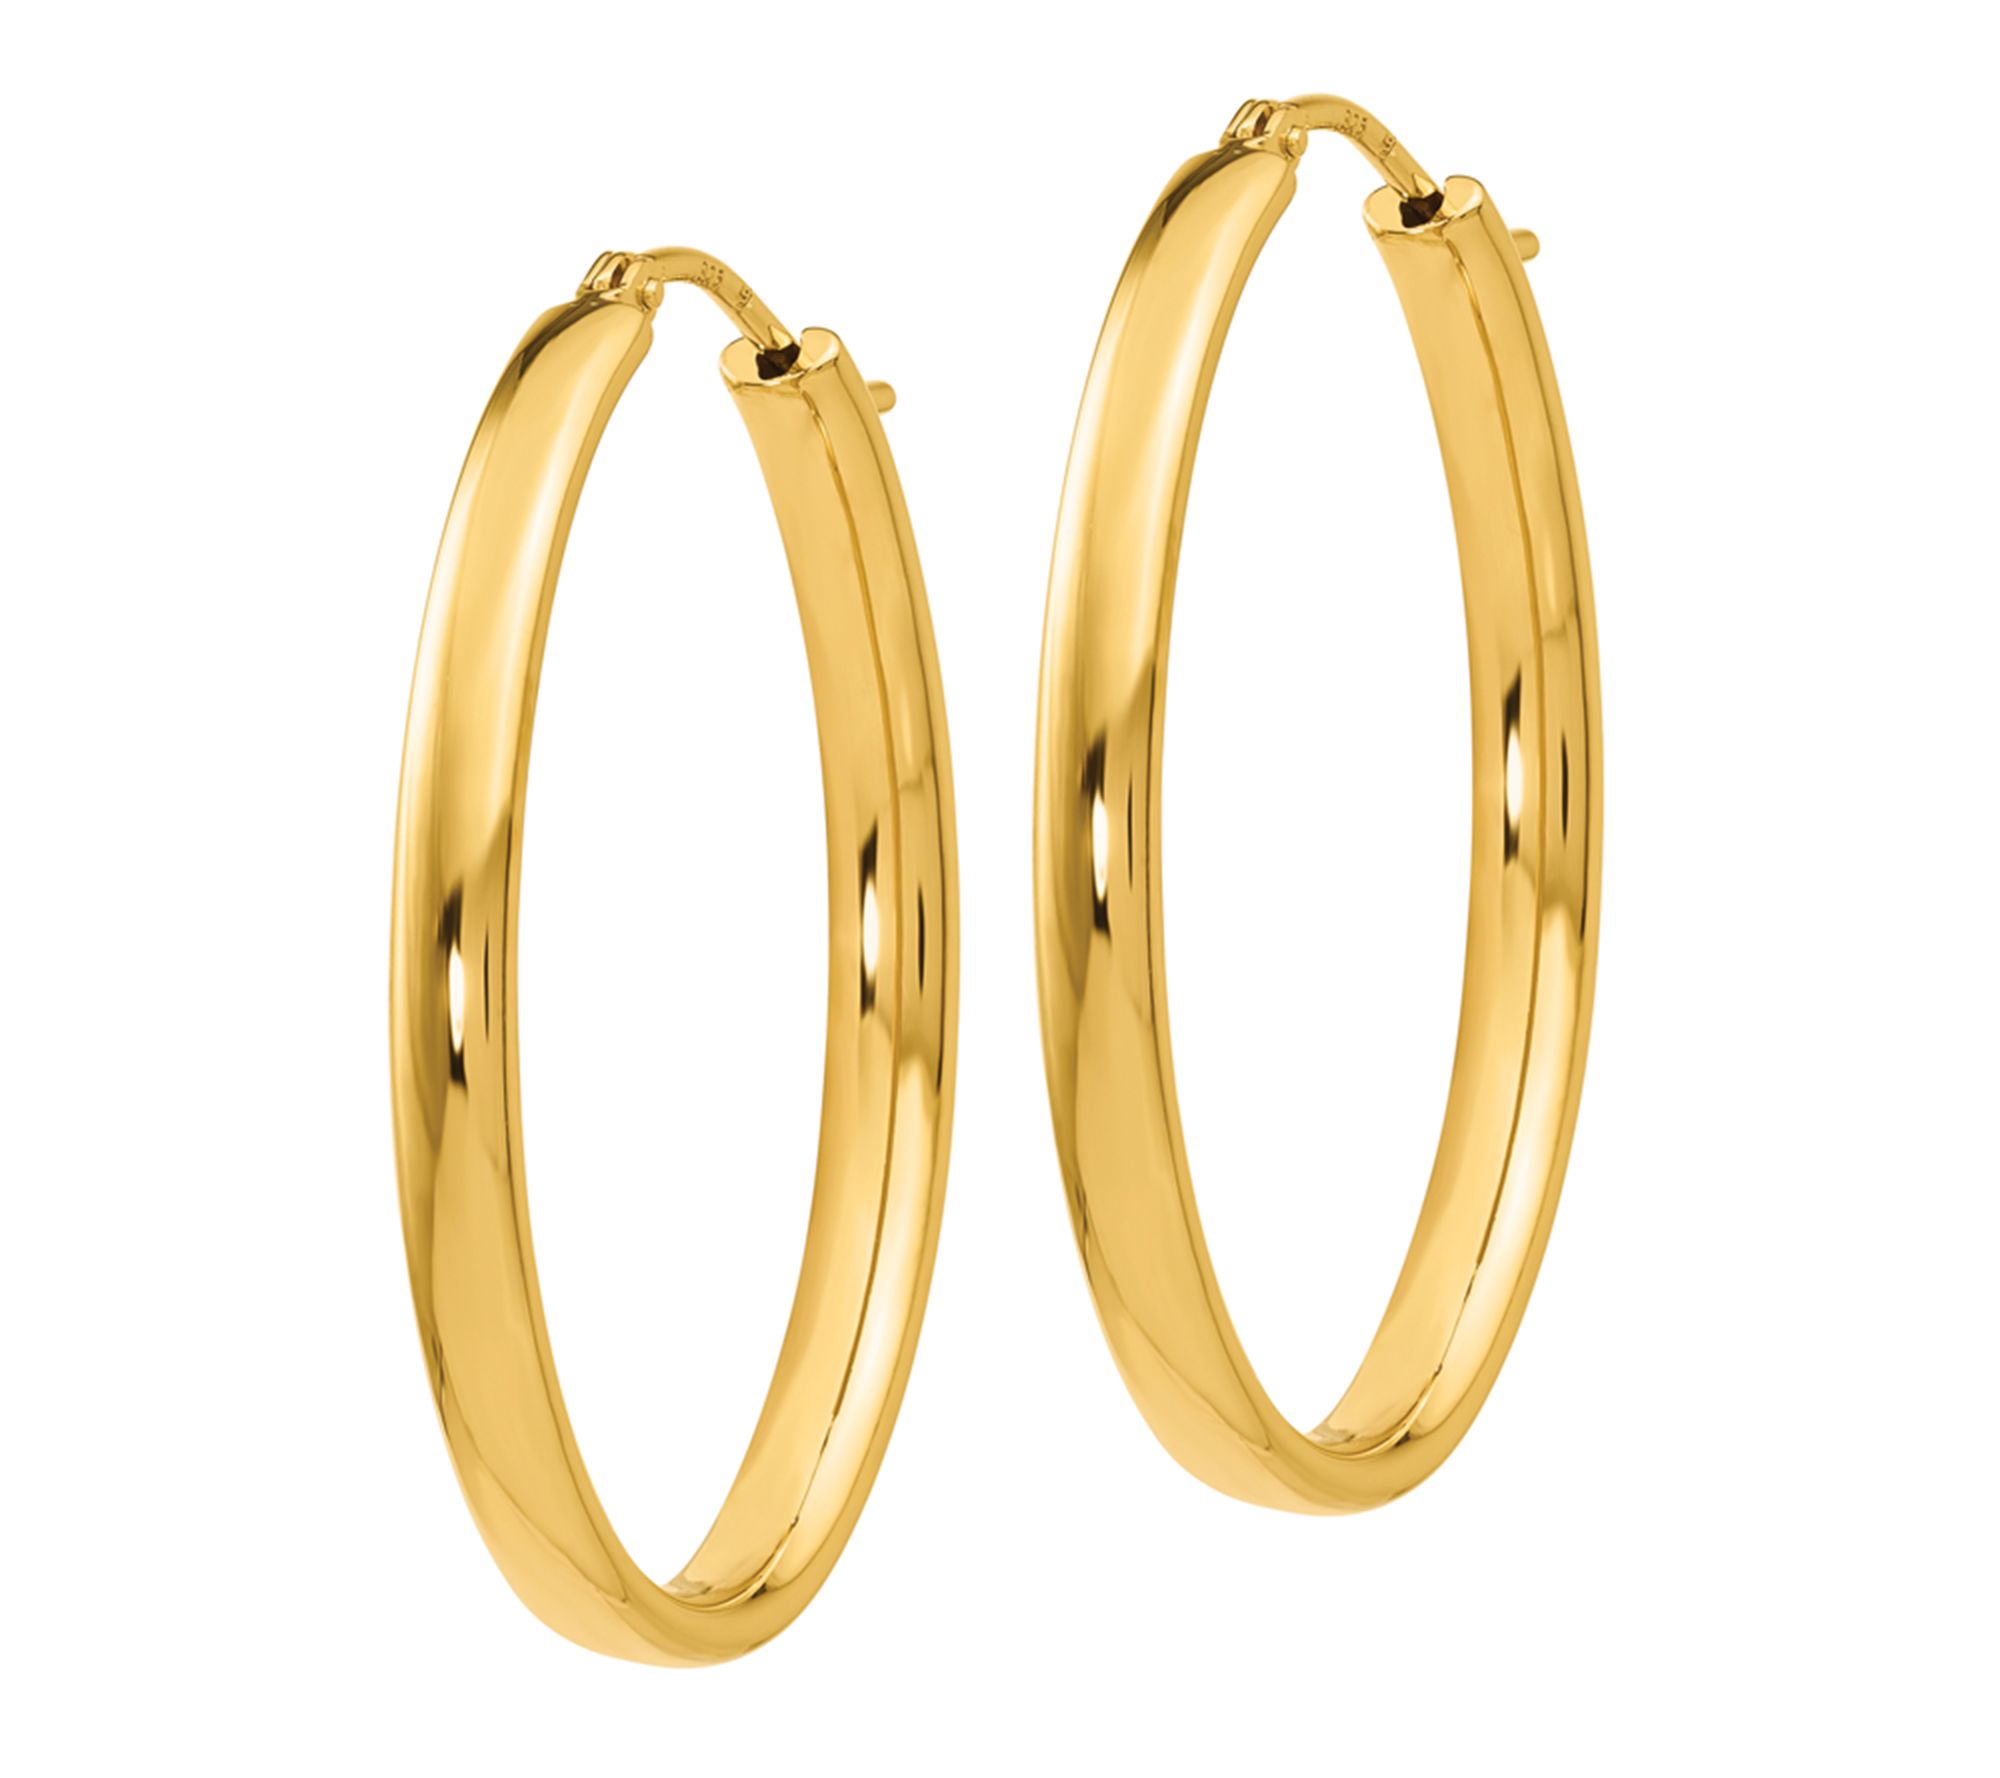 14K Yellow Gold-Plated Sterling Polished Hoop Earrings - QVC.com